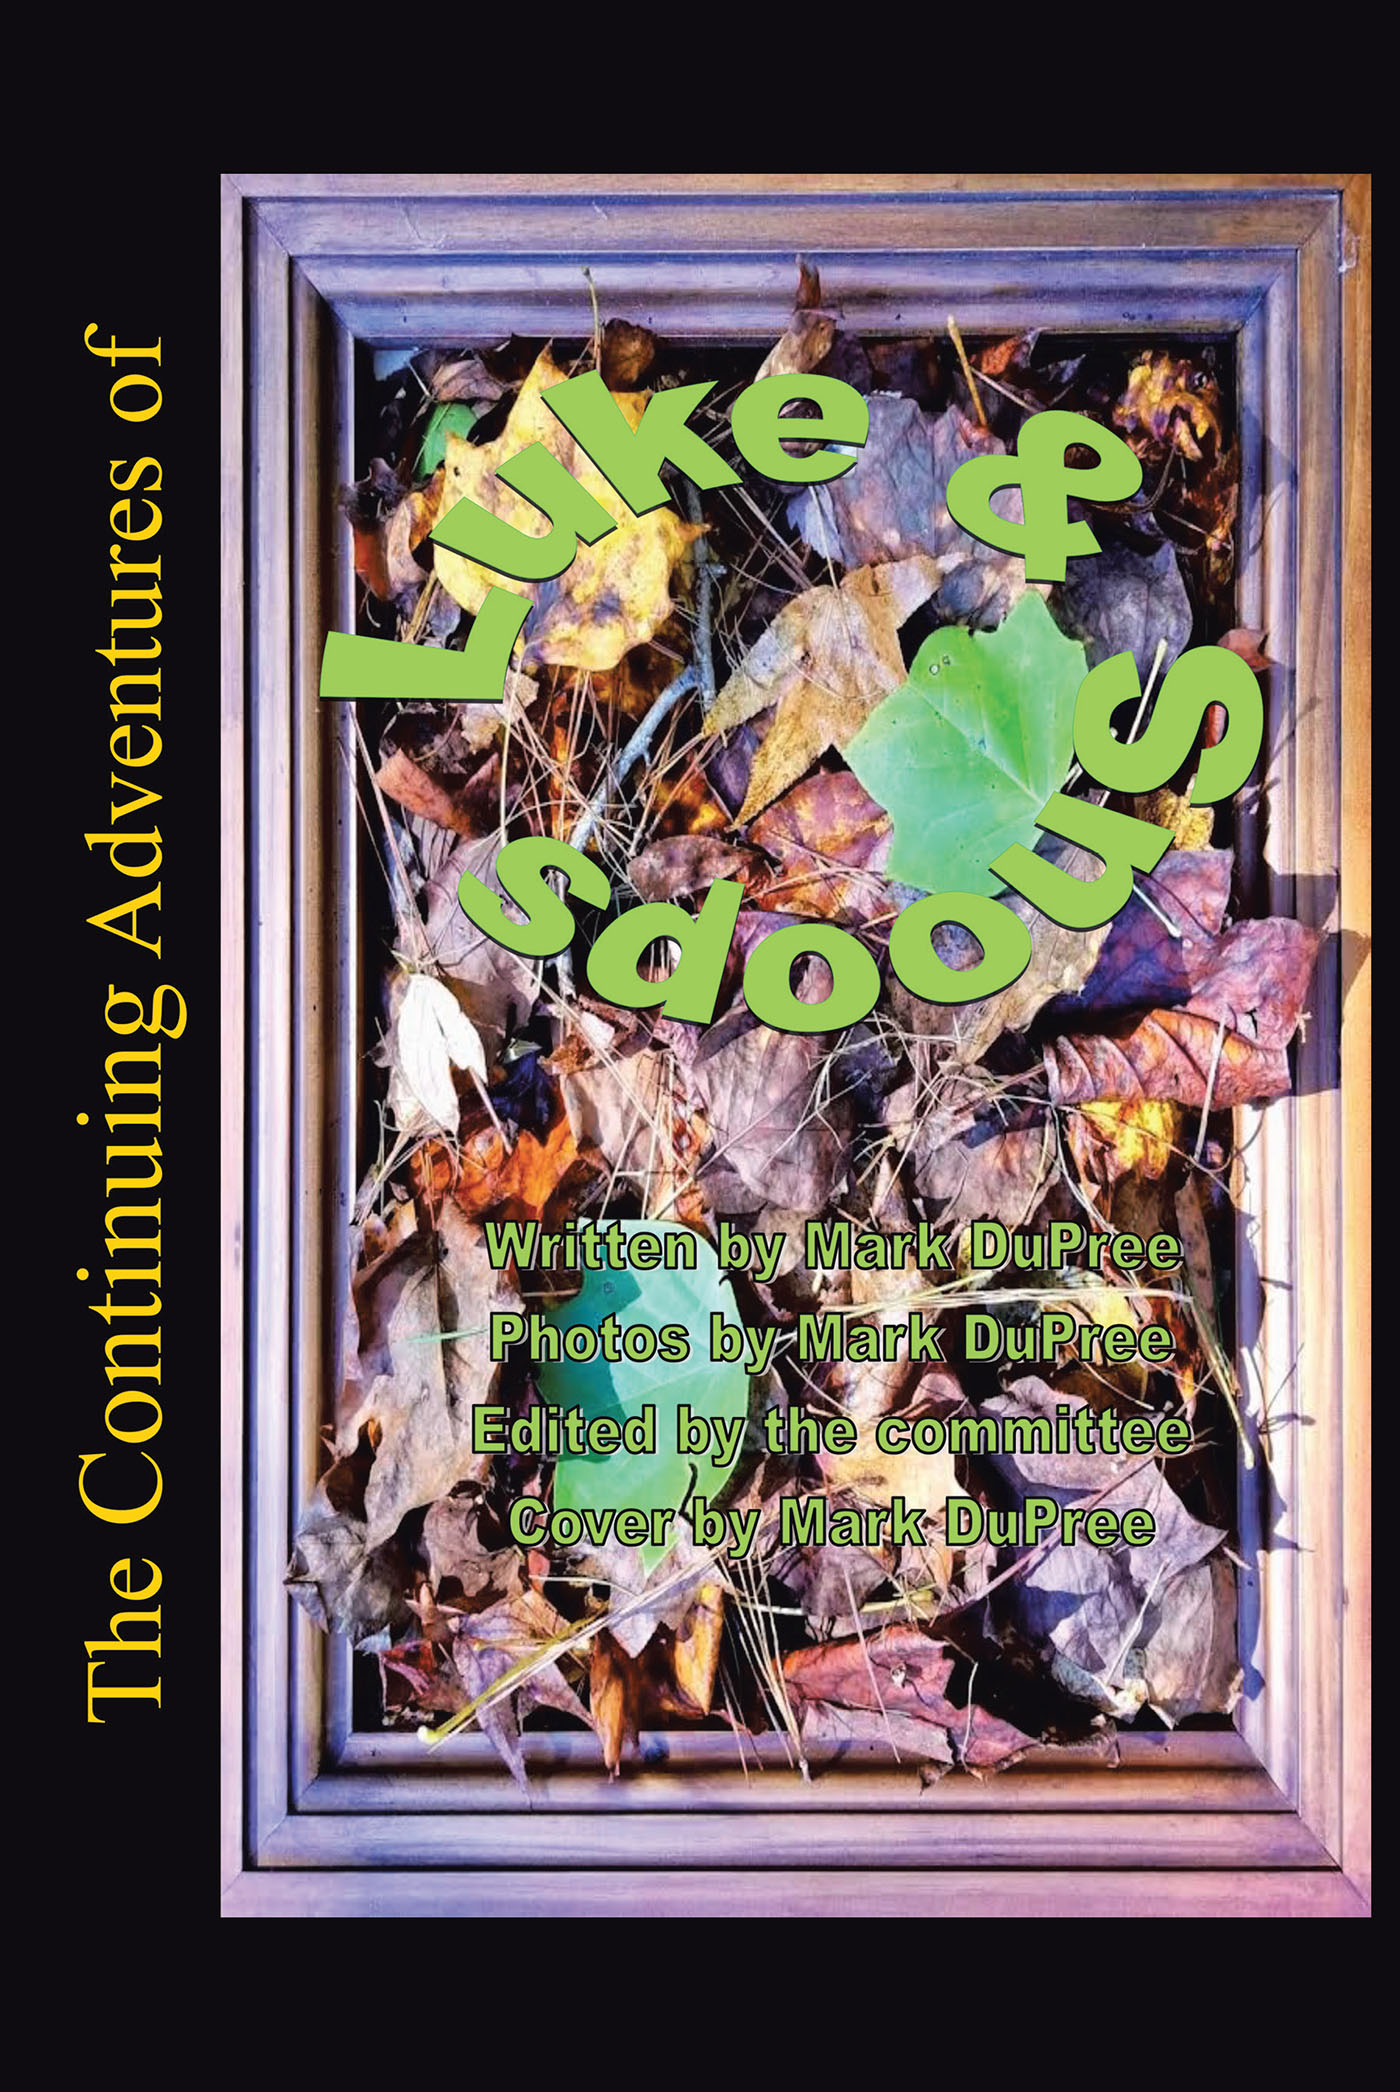 Mark DuPree’s Newly Released "The Continuing Adventures of Luke and Snoops" is a Charming Collection of Adventurous Short Stories